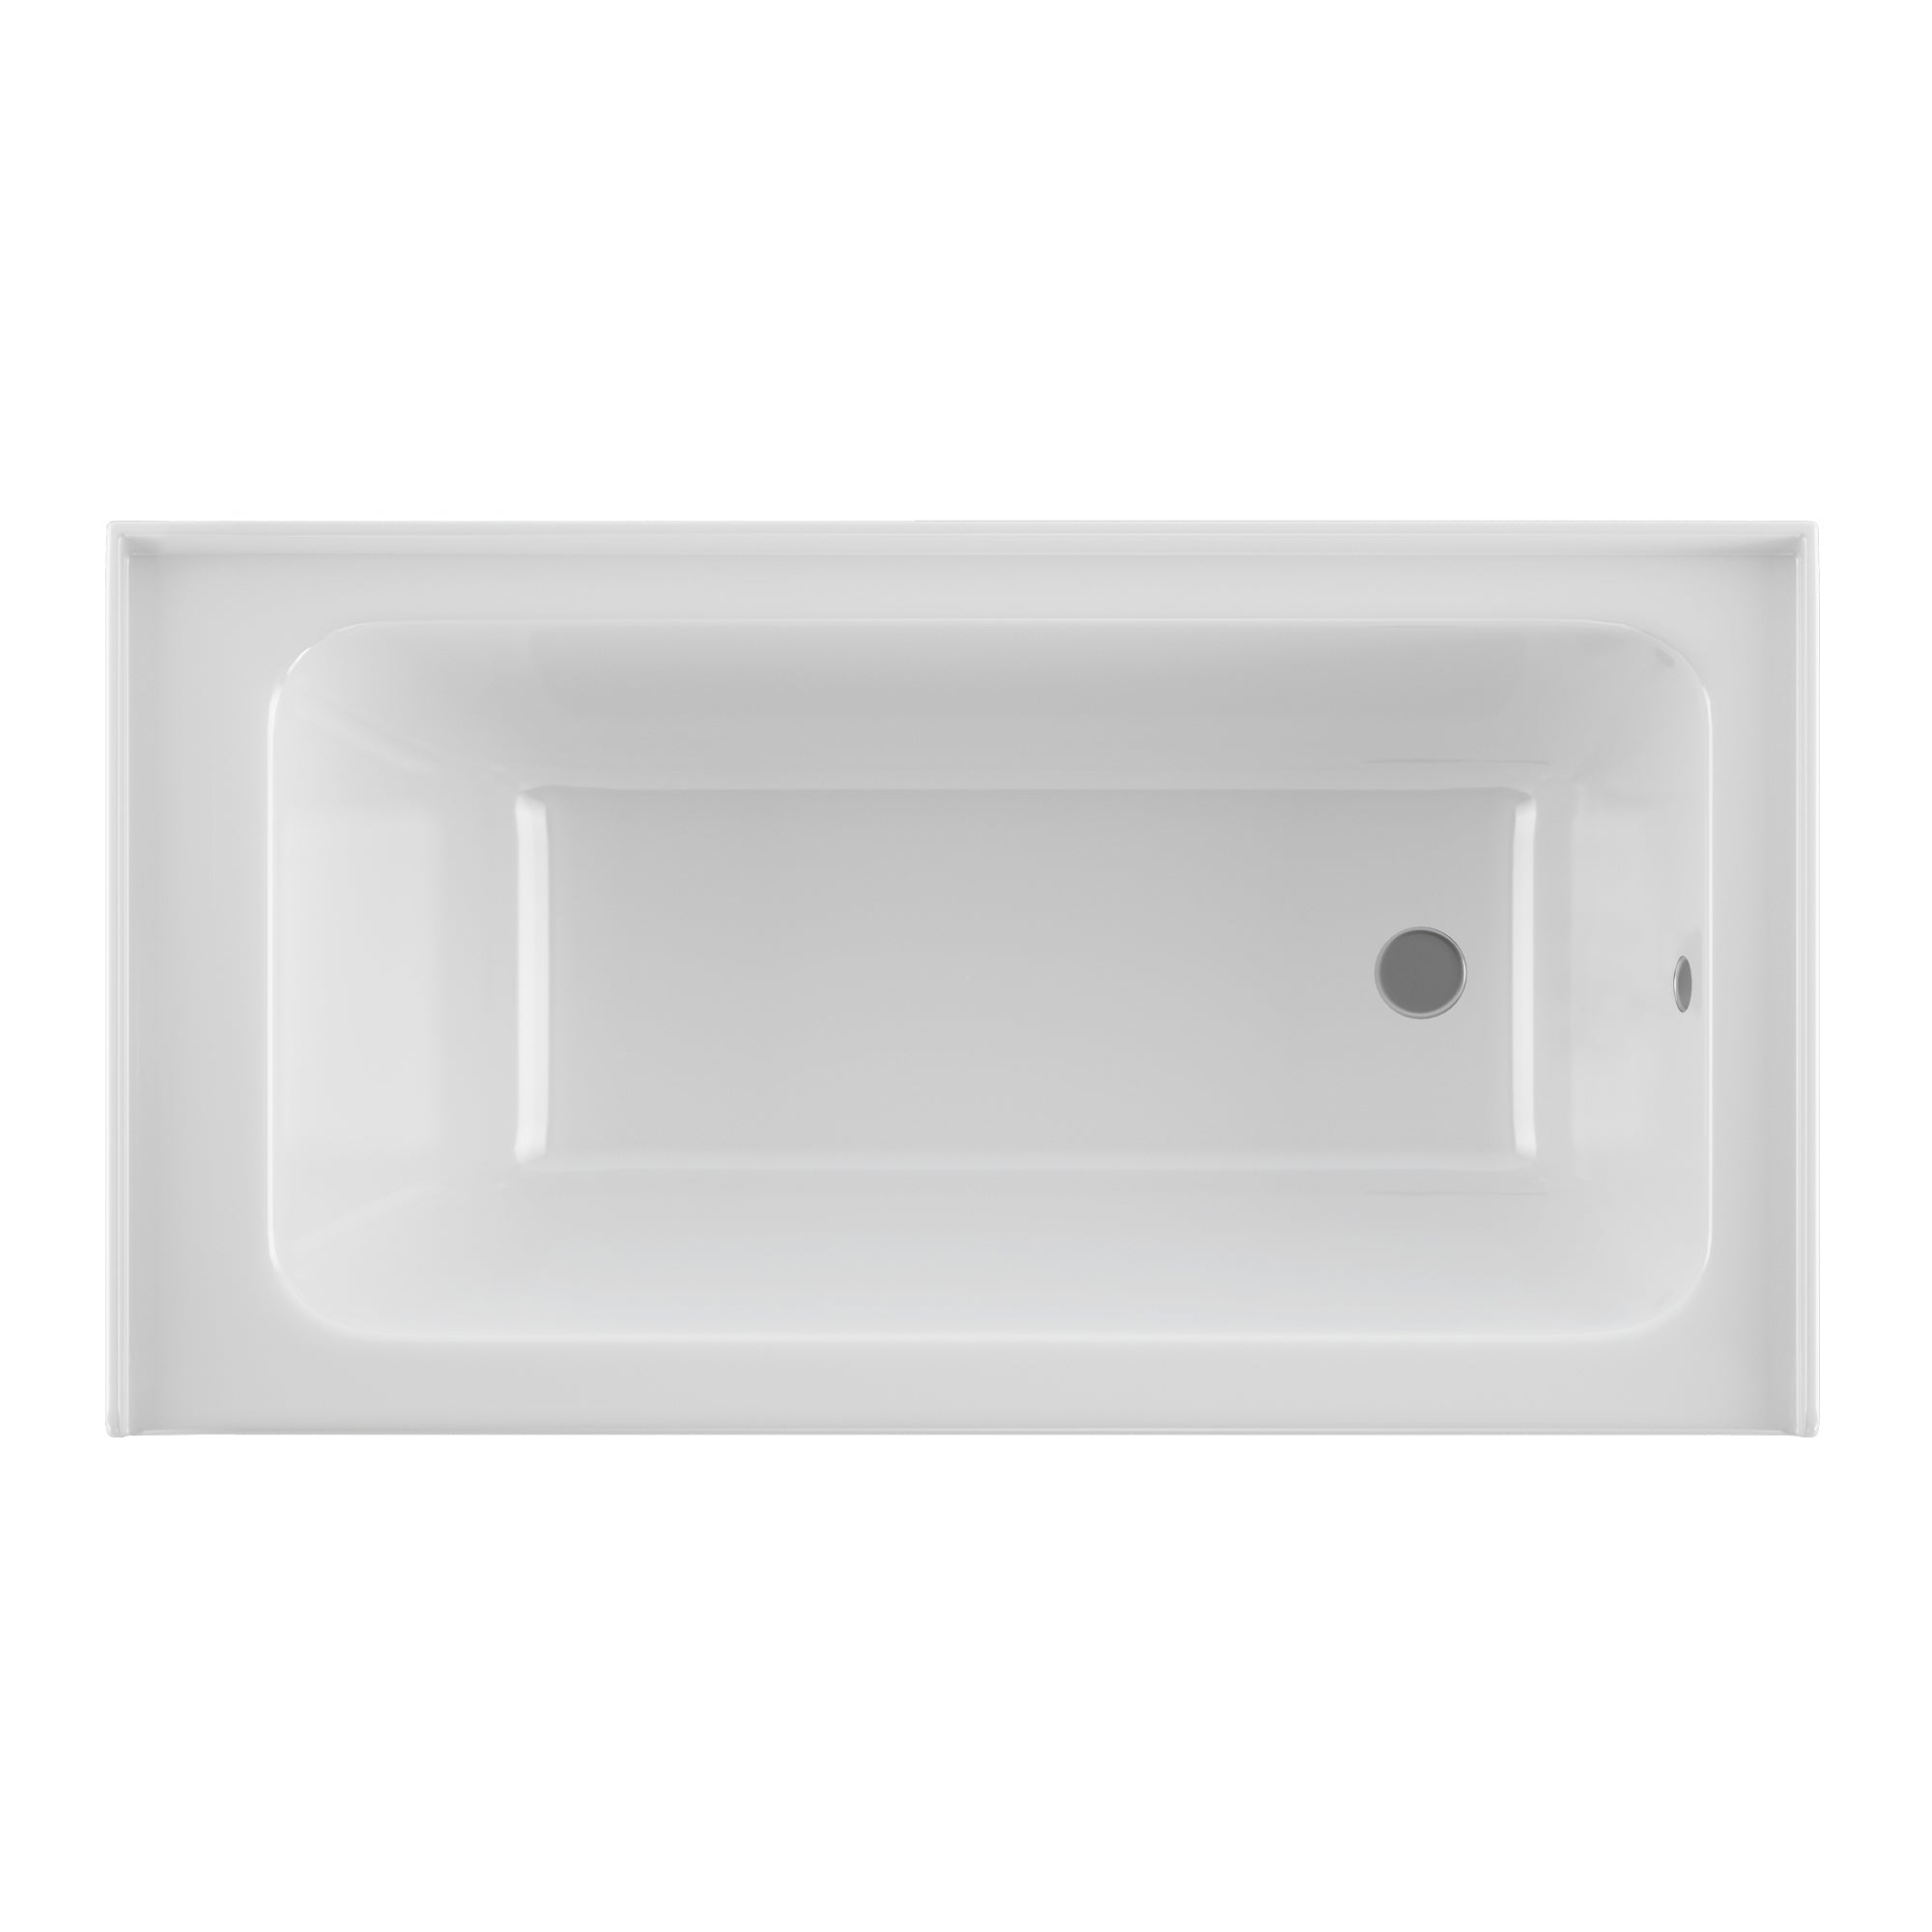 PULSE ShowerSpas 32" Wide White 100% High Gloss Acrylic Alcove Tub - Fiberglass middle layer - 20"H x 60"W x 32"D - Right Configuration - PT-2001-32 - Vital Hydrotherapy